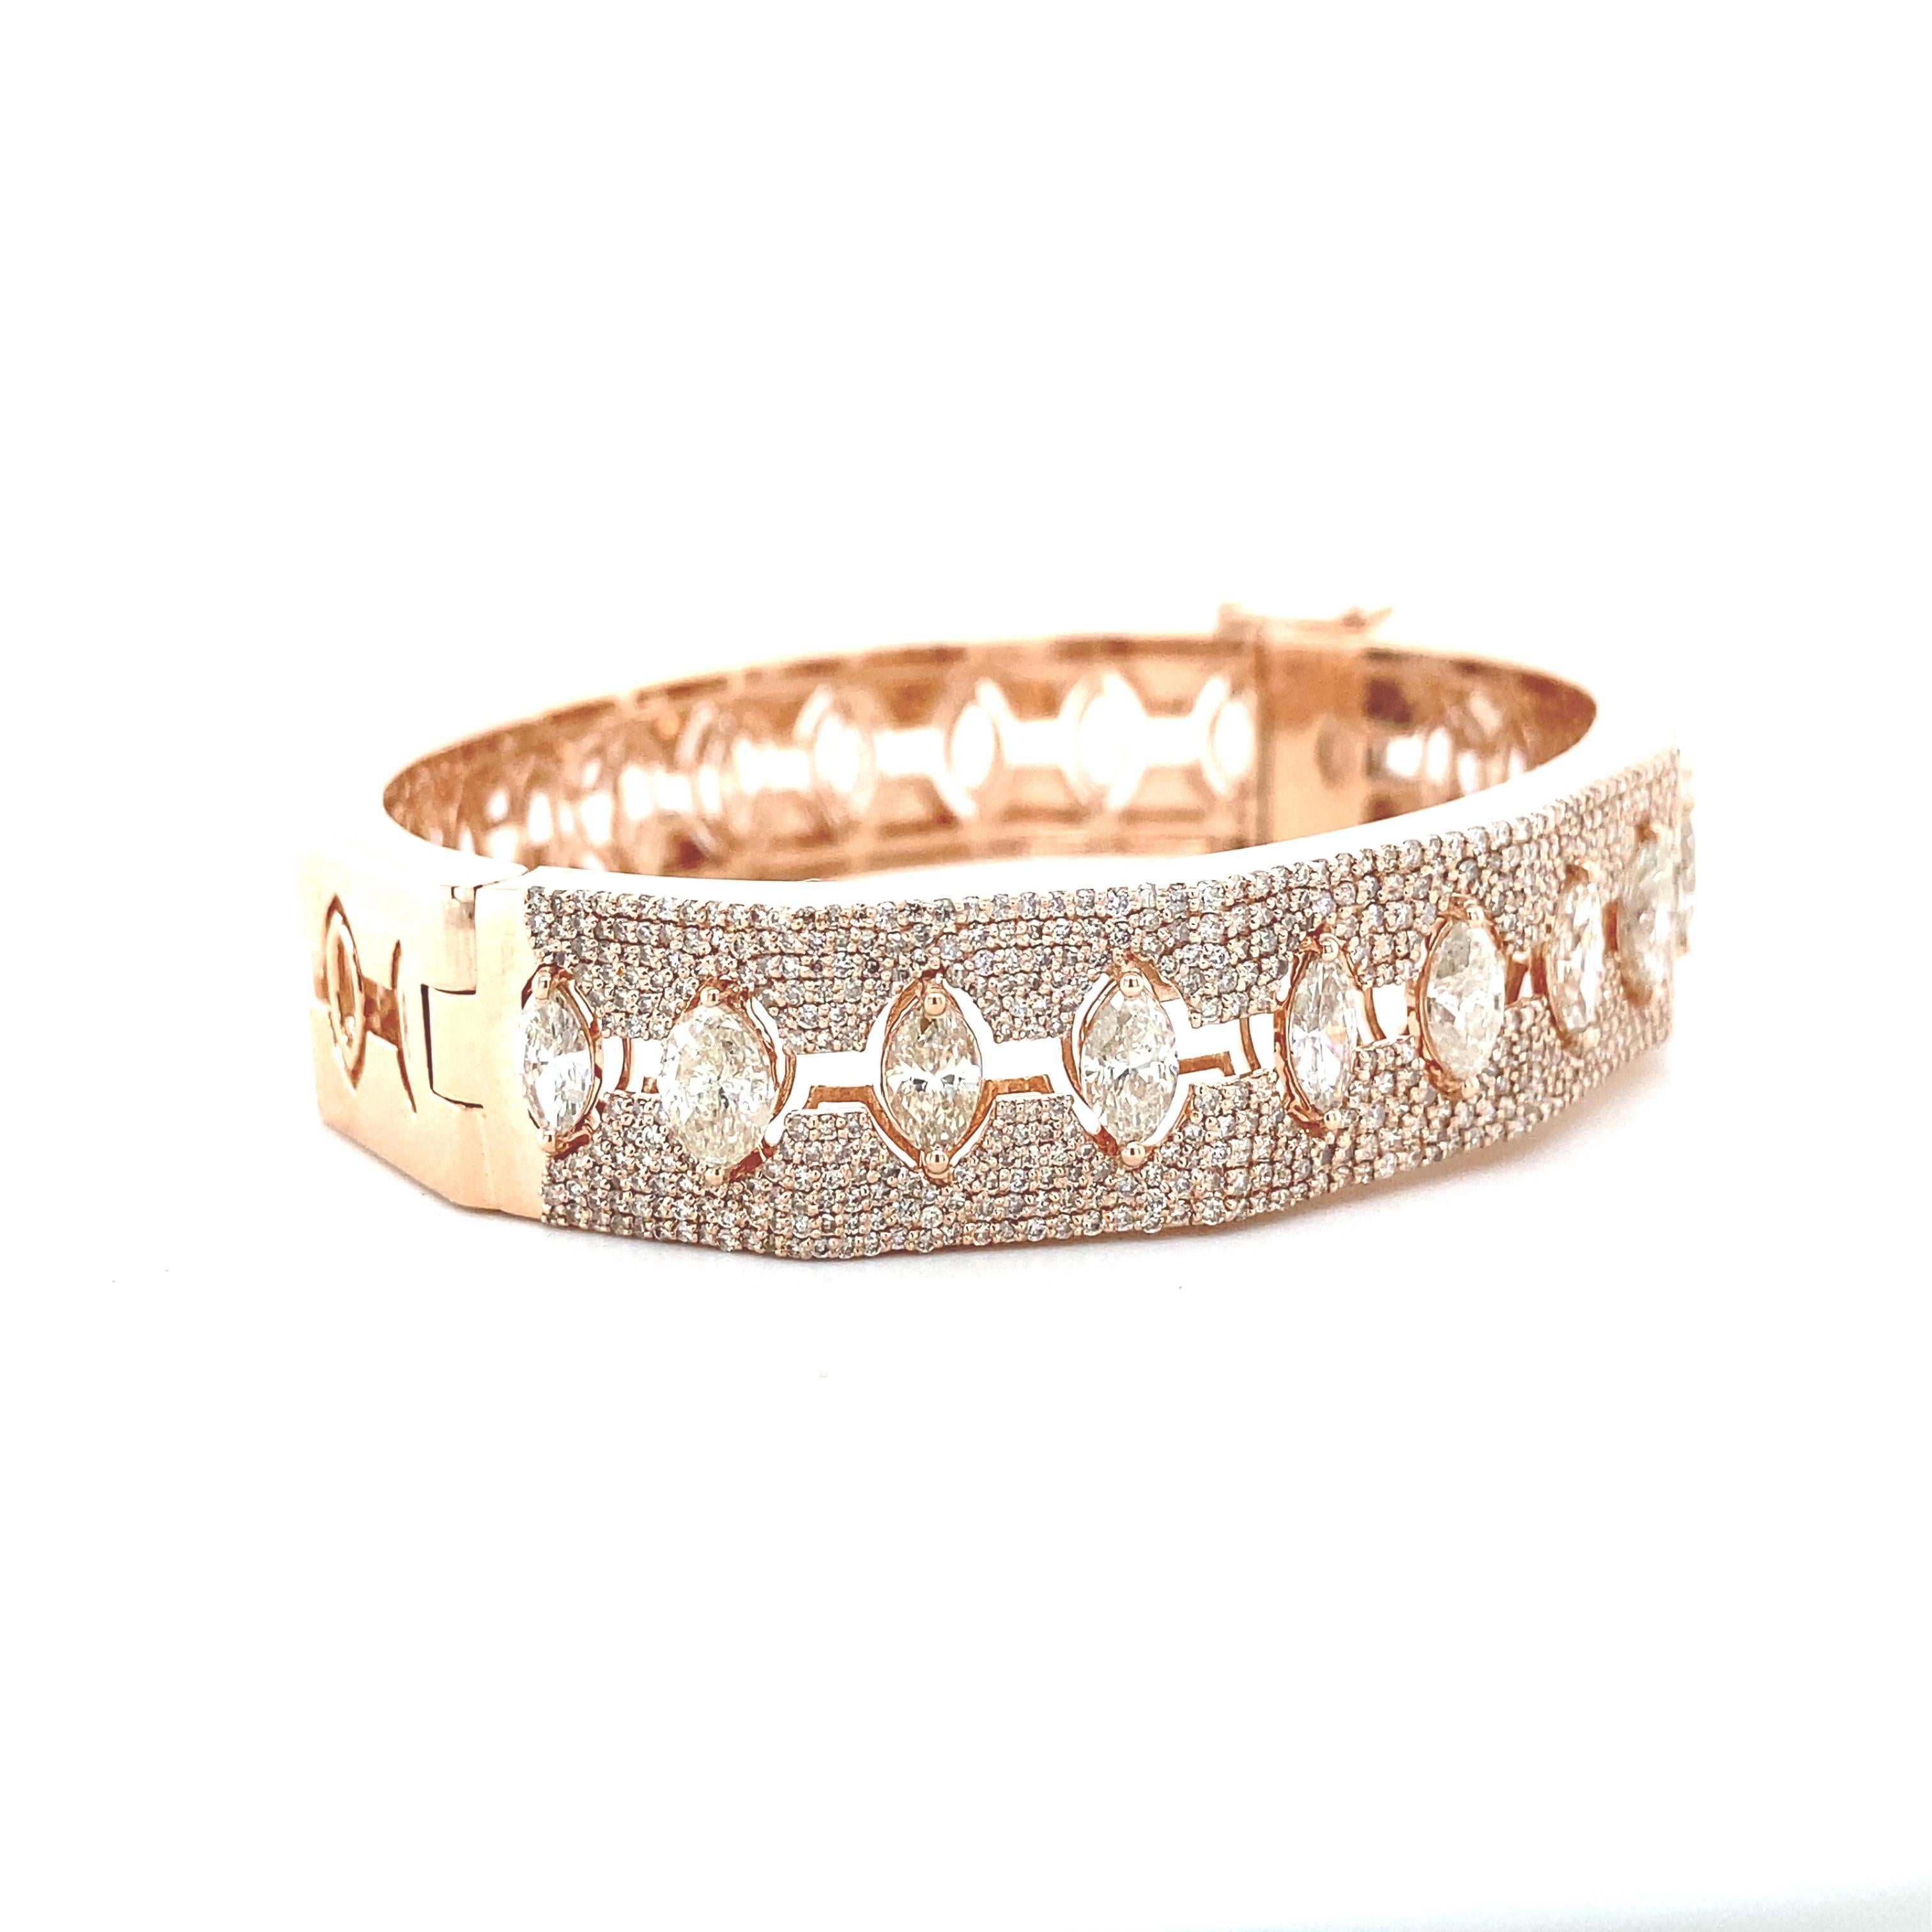 The bracelet is a stunning piece of craftsmanship, showcasing a brilliant array of marquise and round diamonds encased in the warm embrace of 18K rose gold. The delicate balance of diamond shapes creates an opulent tapestry of light and luxury,